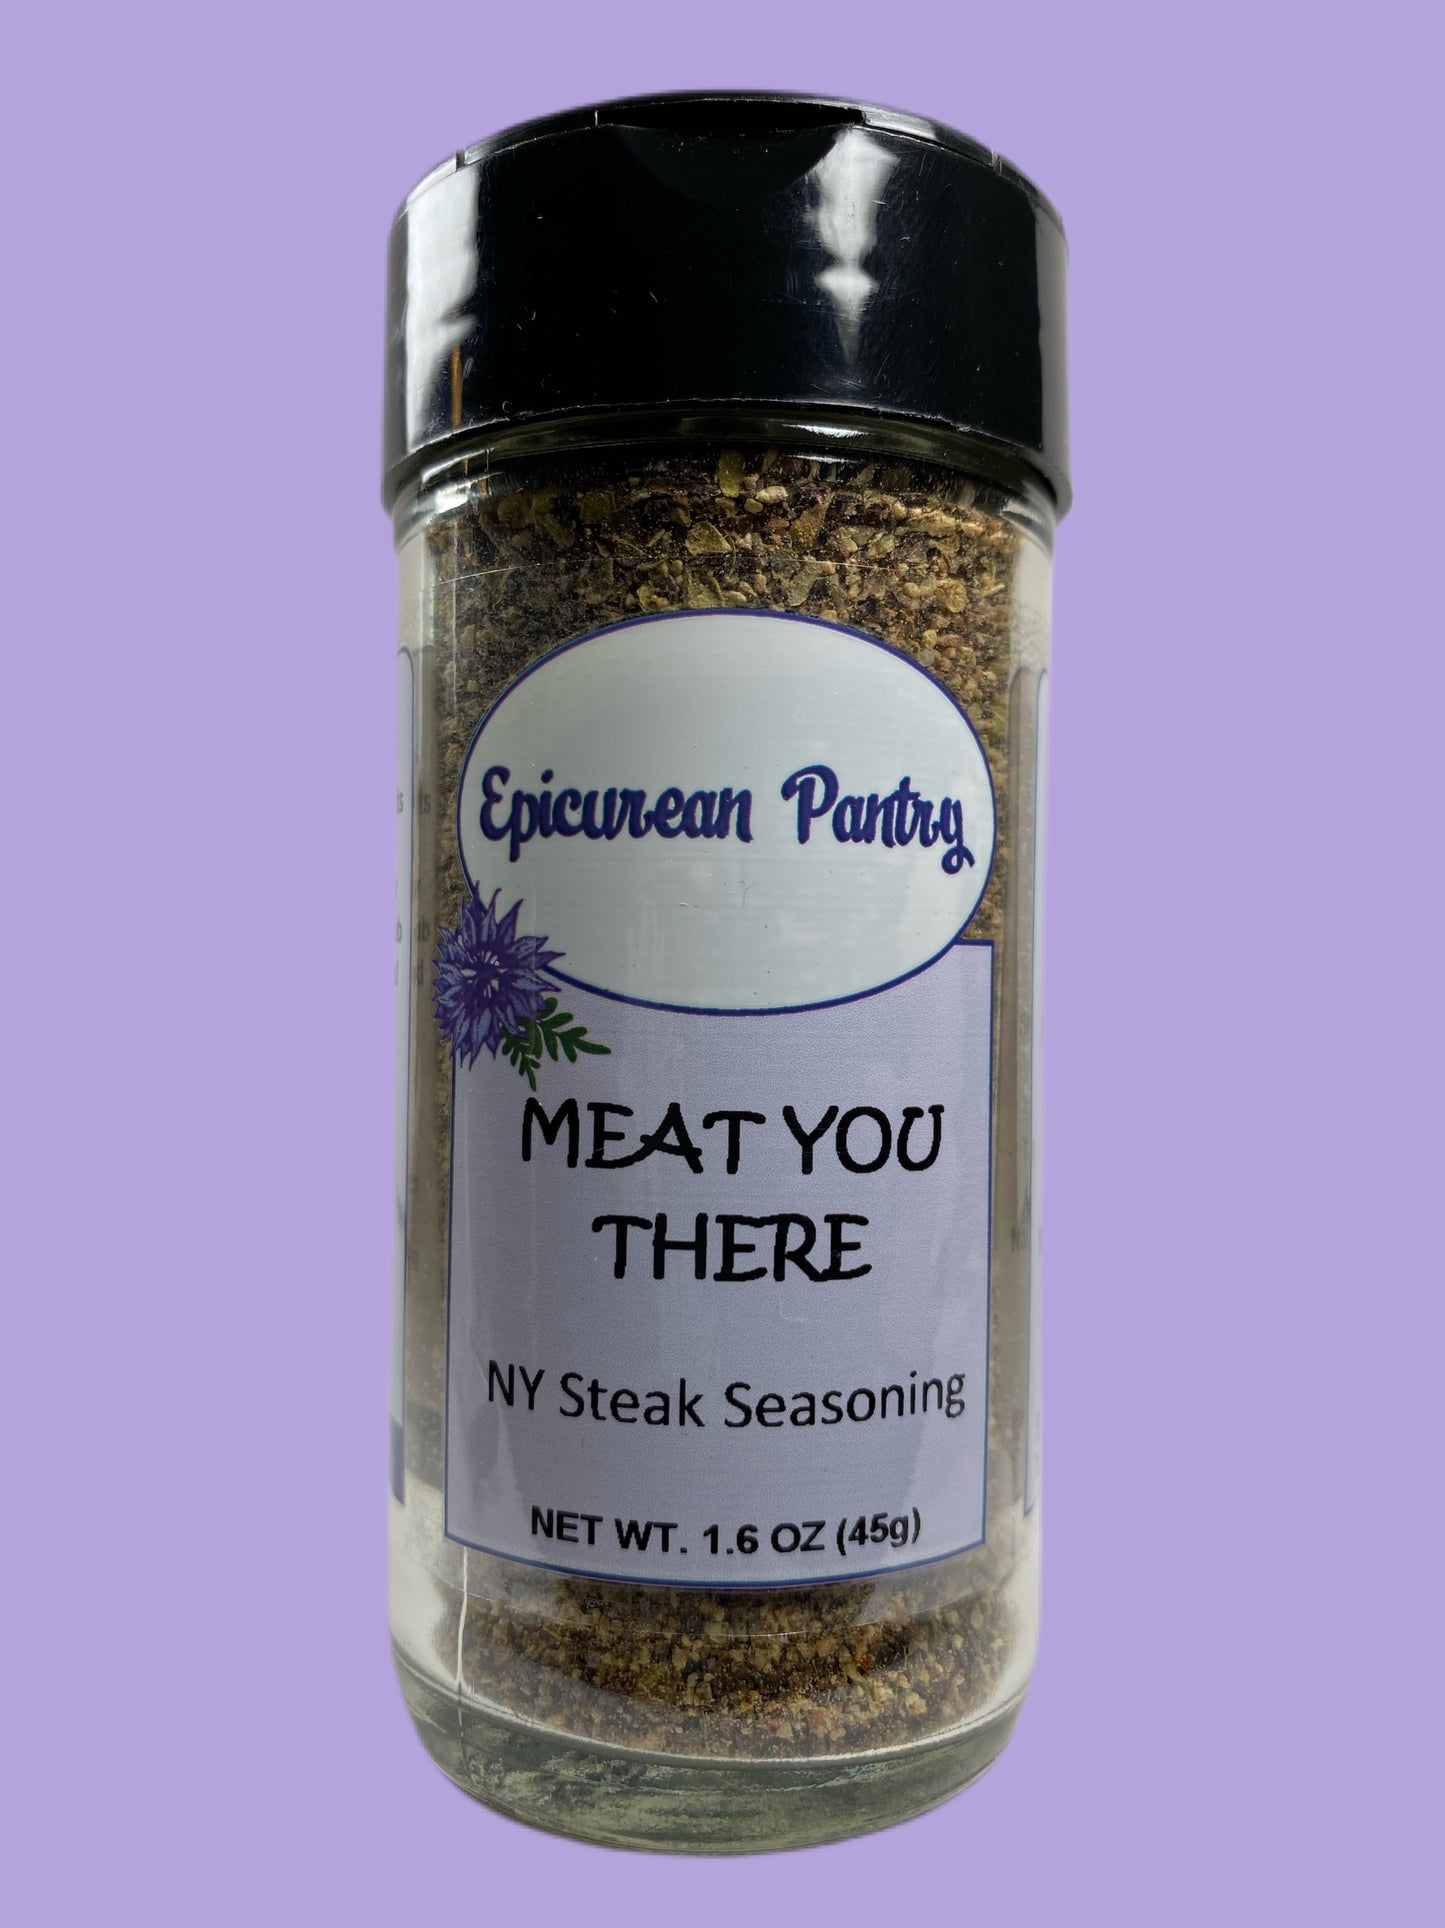 Meat You There - NY Steak Seasoning - 1.6 oz net wt